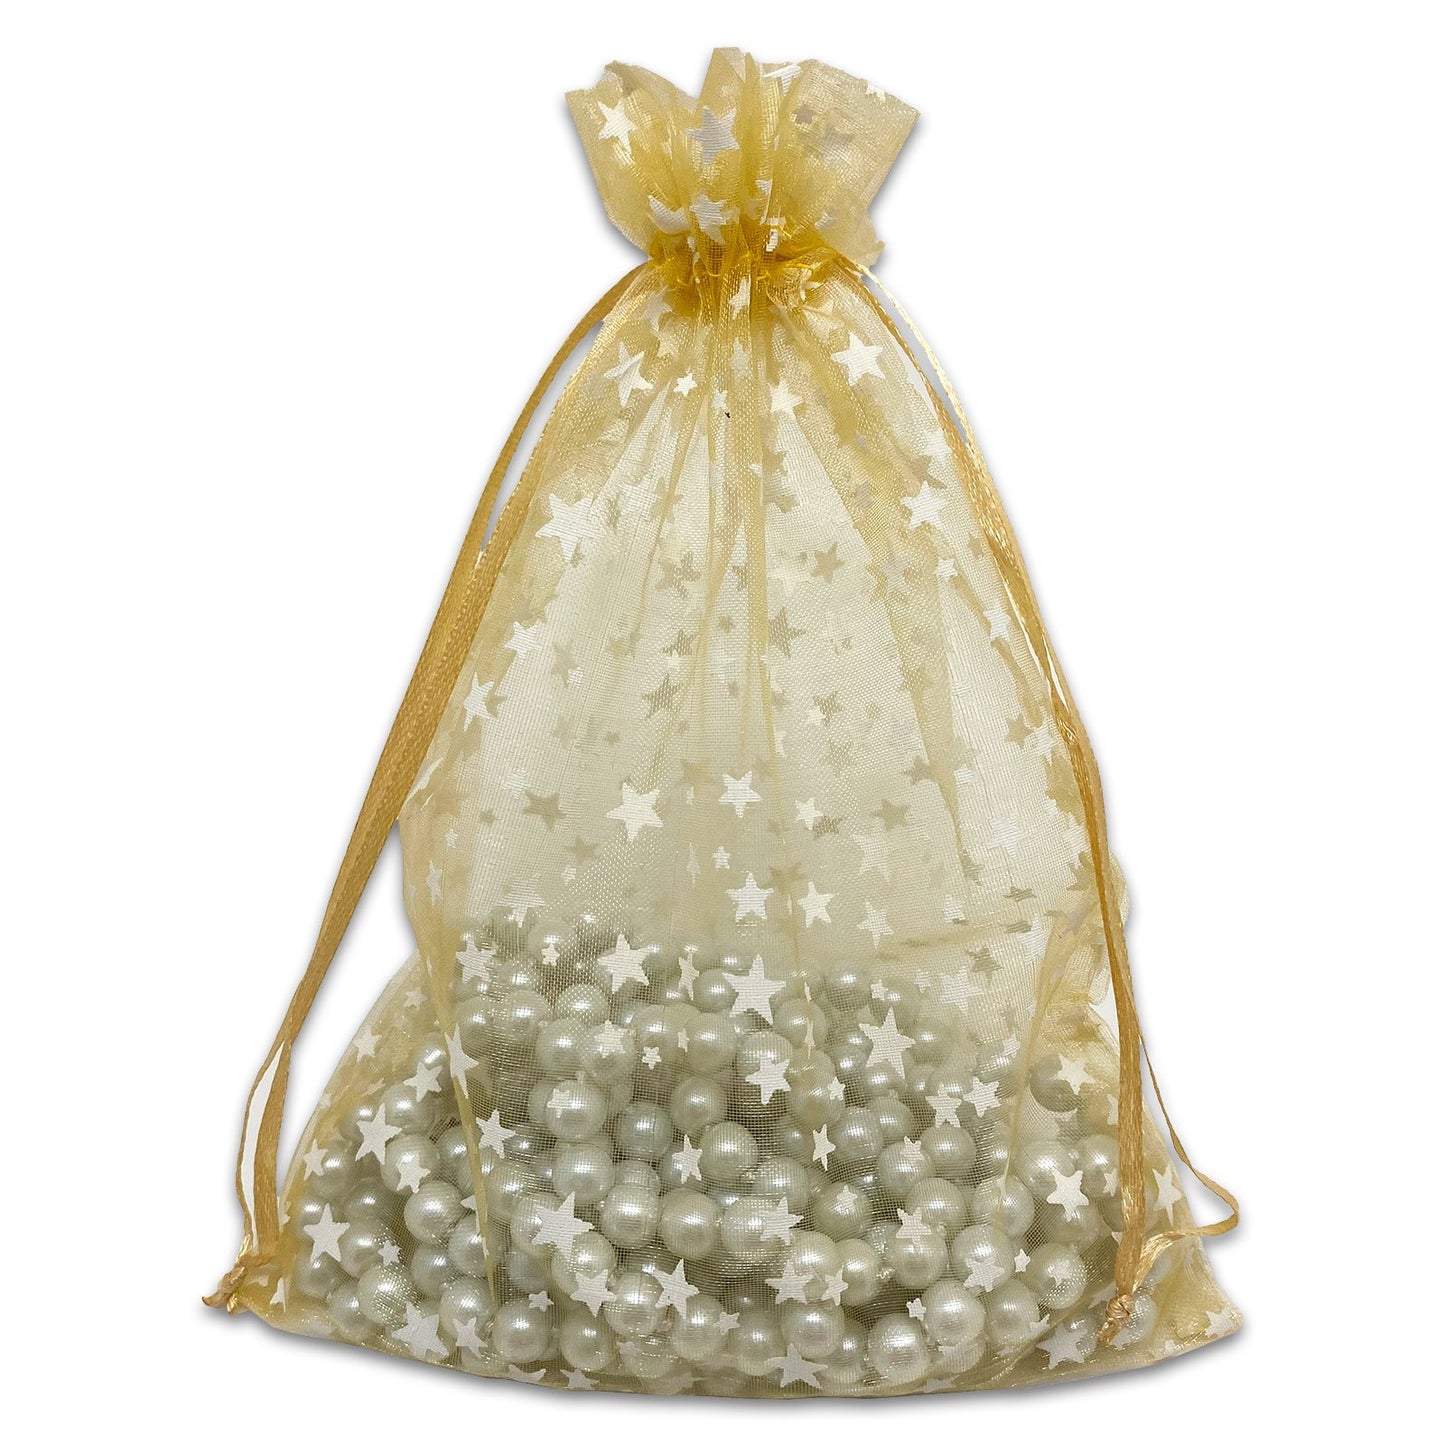 Gold with White Star Organza Drawstring Pouch Gift Bags